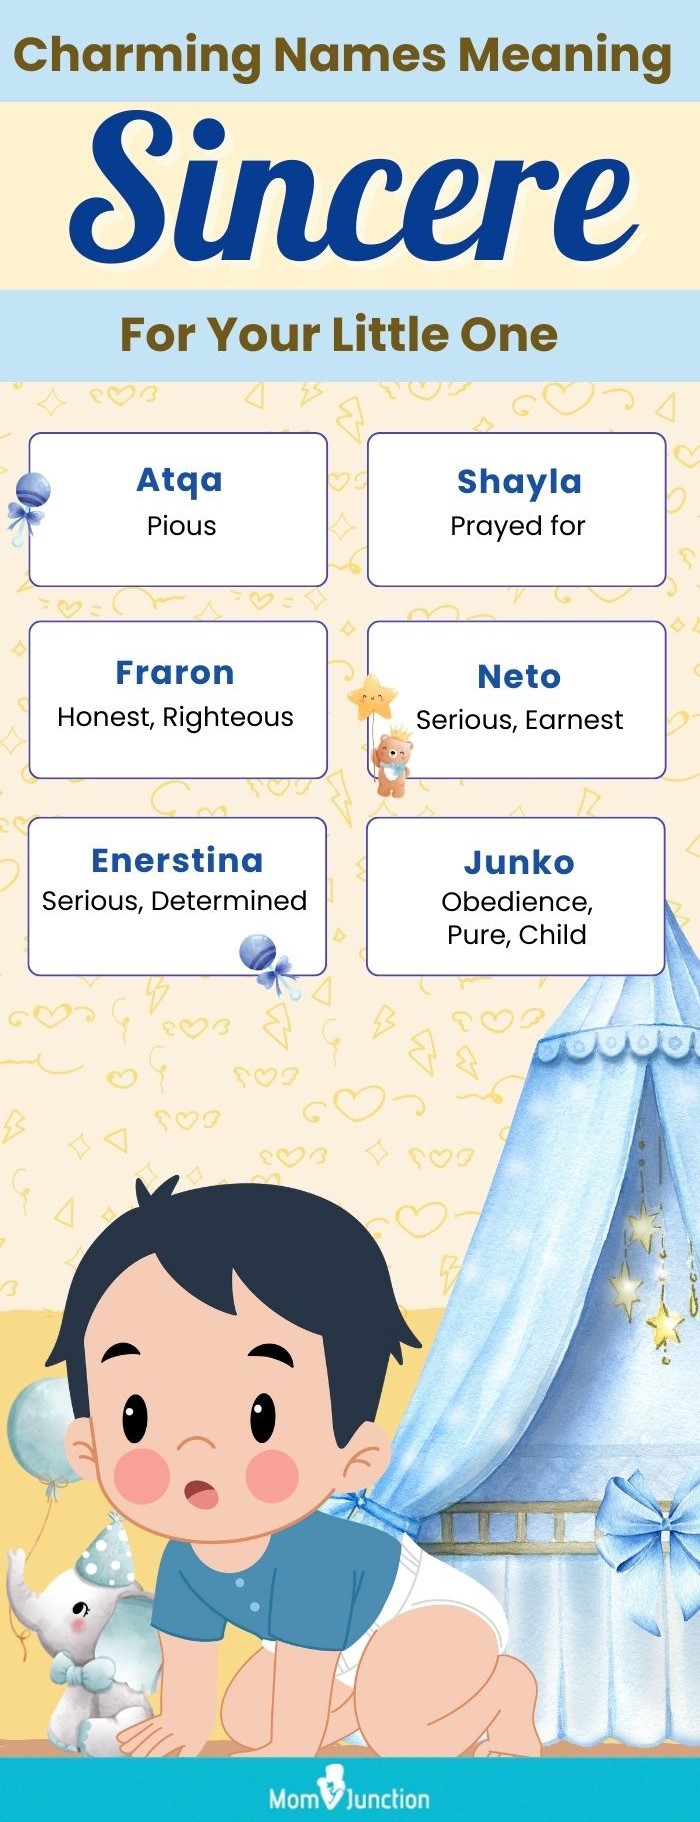 charming names meaning sincere for your little one (infographic)